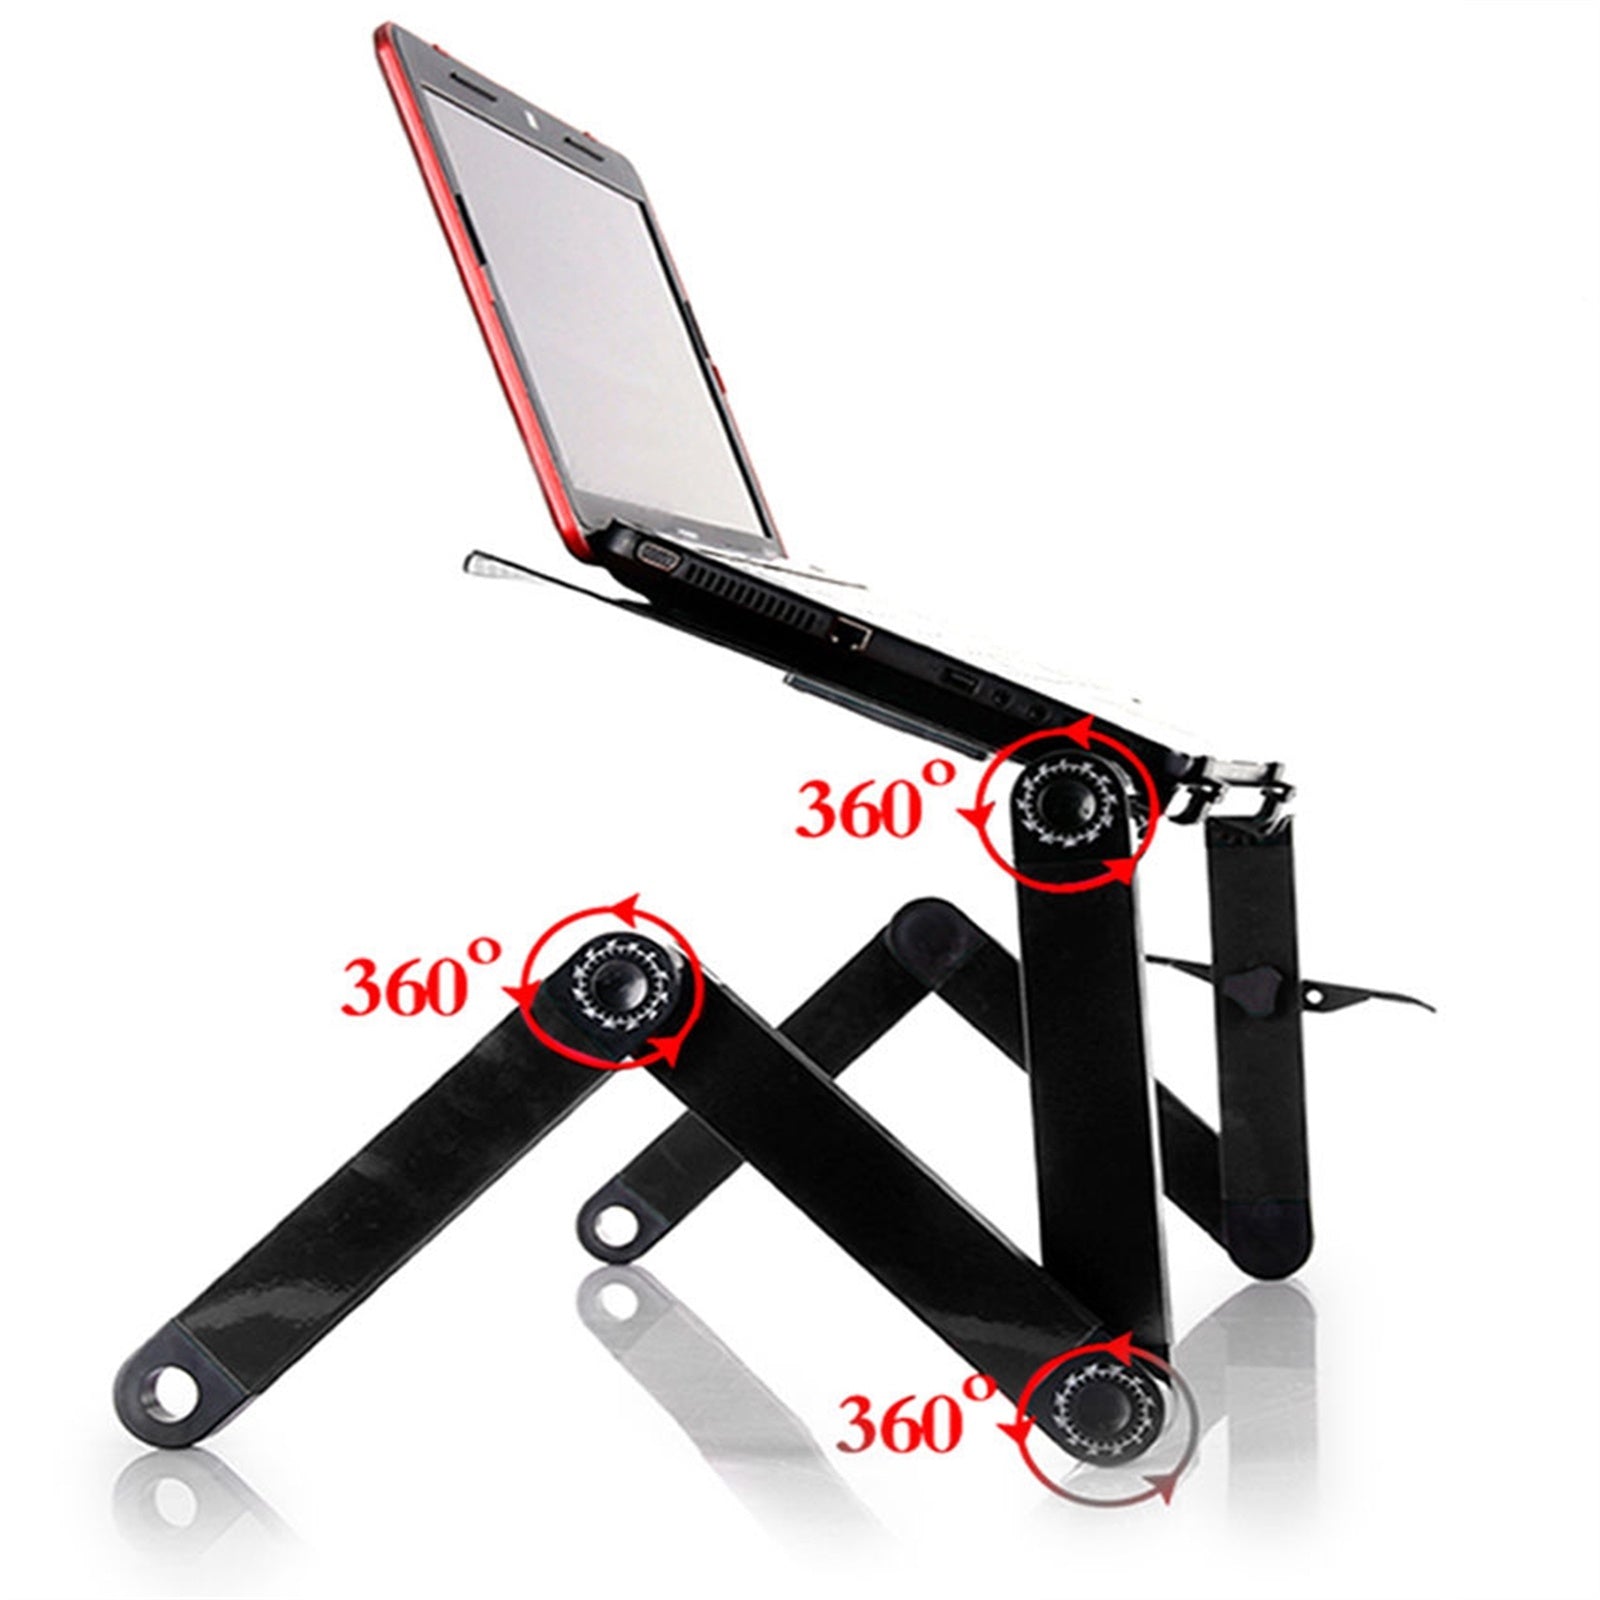 Free shipping Adjustable Laptop Stand, Portable Laptop Table Stand Ergonomic Lap Desk TV Bed Tray Standing Desk YJ